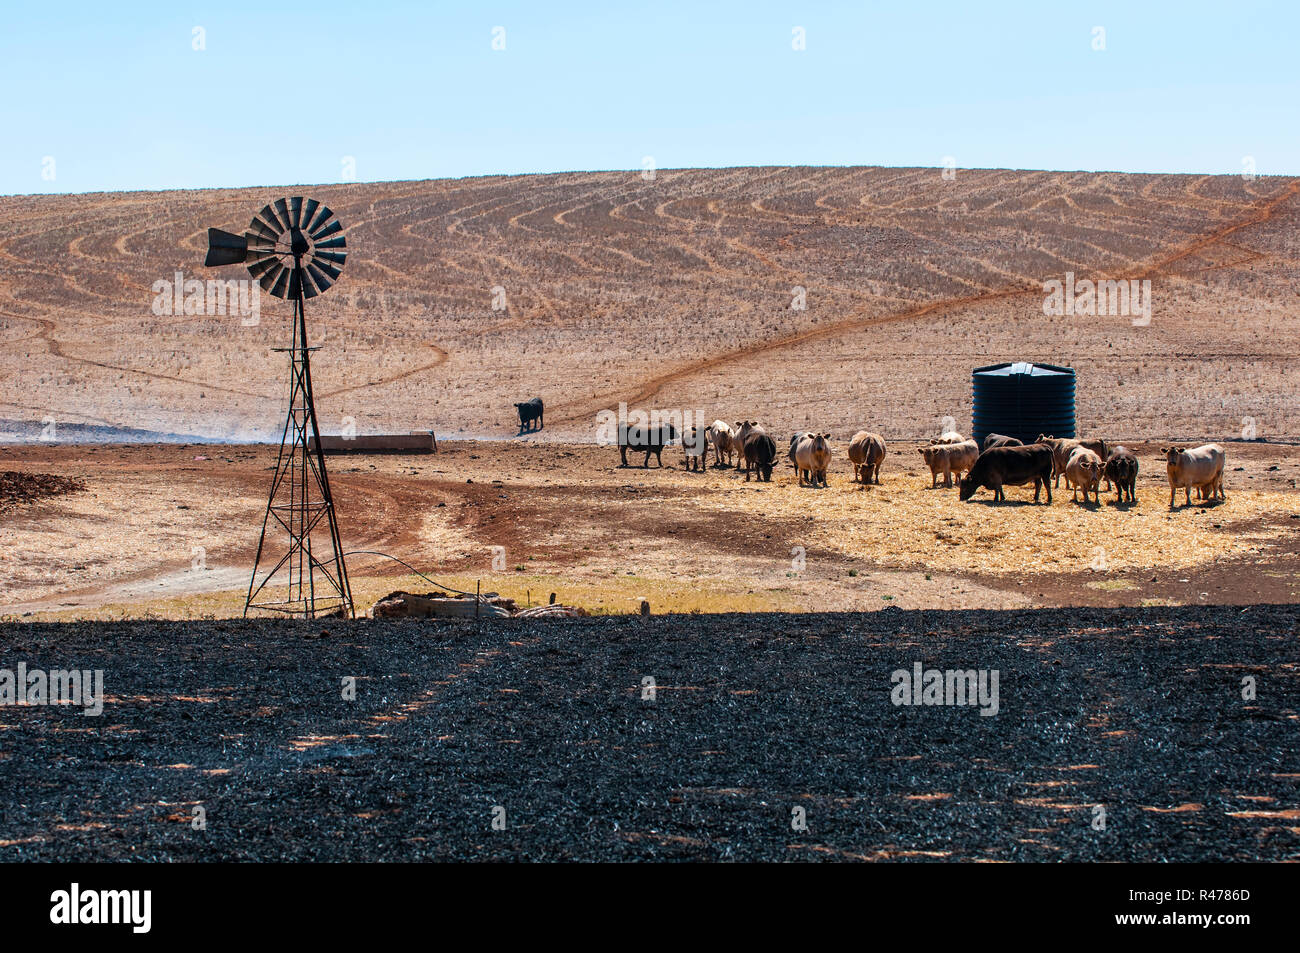 Cattle farming in the Australian Outback Stock Photo